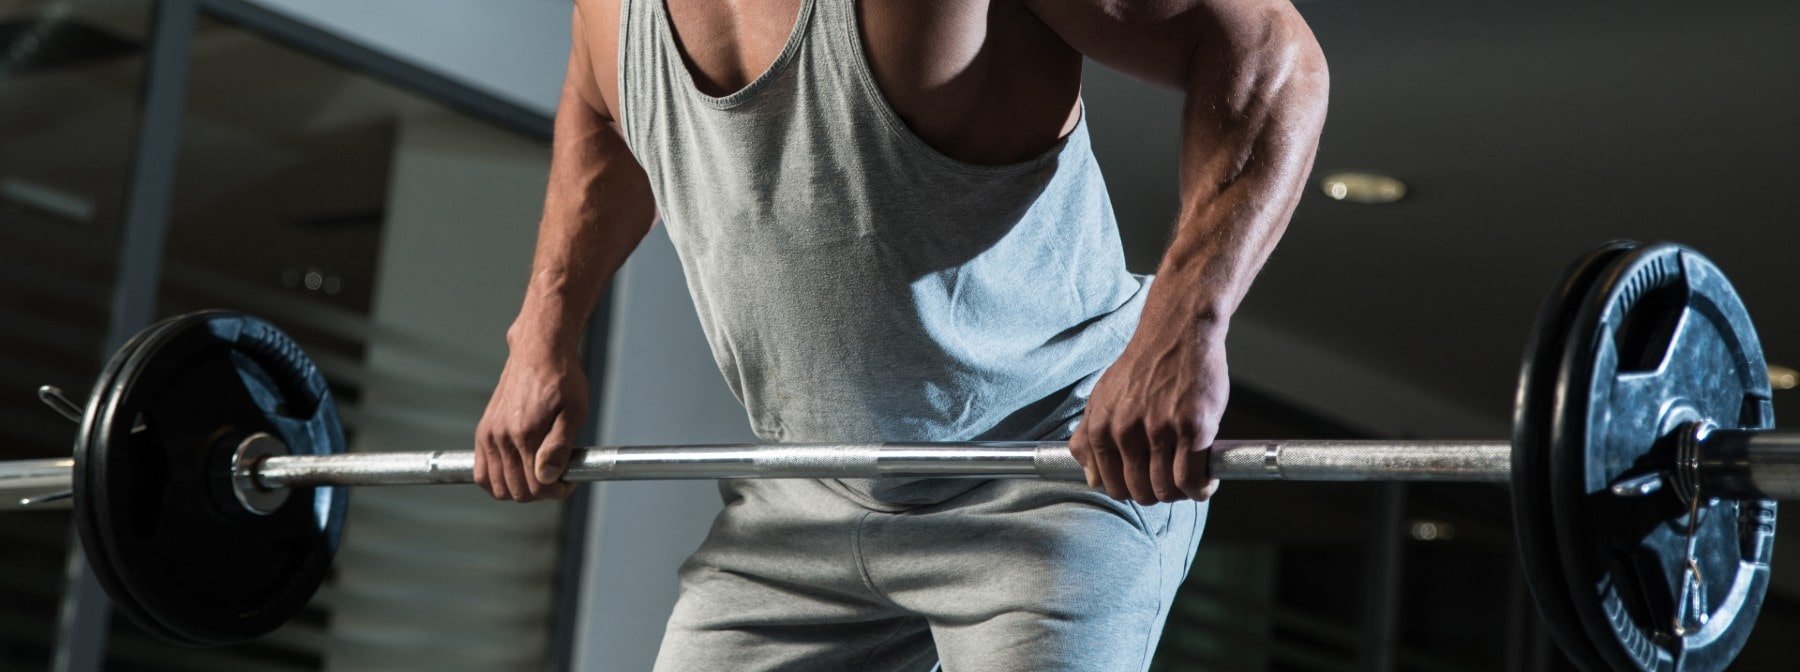 How to do barbell rows the right way: why bent over rows are great